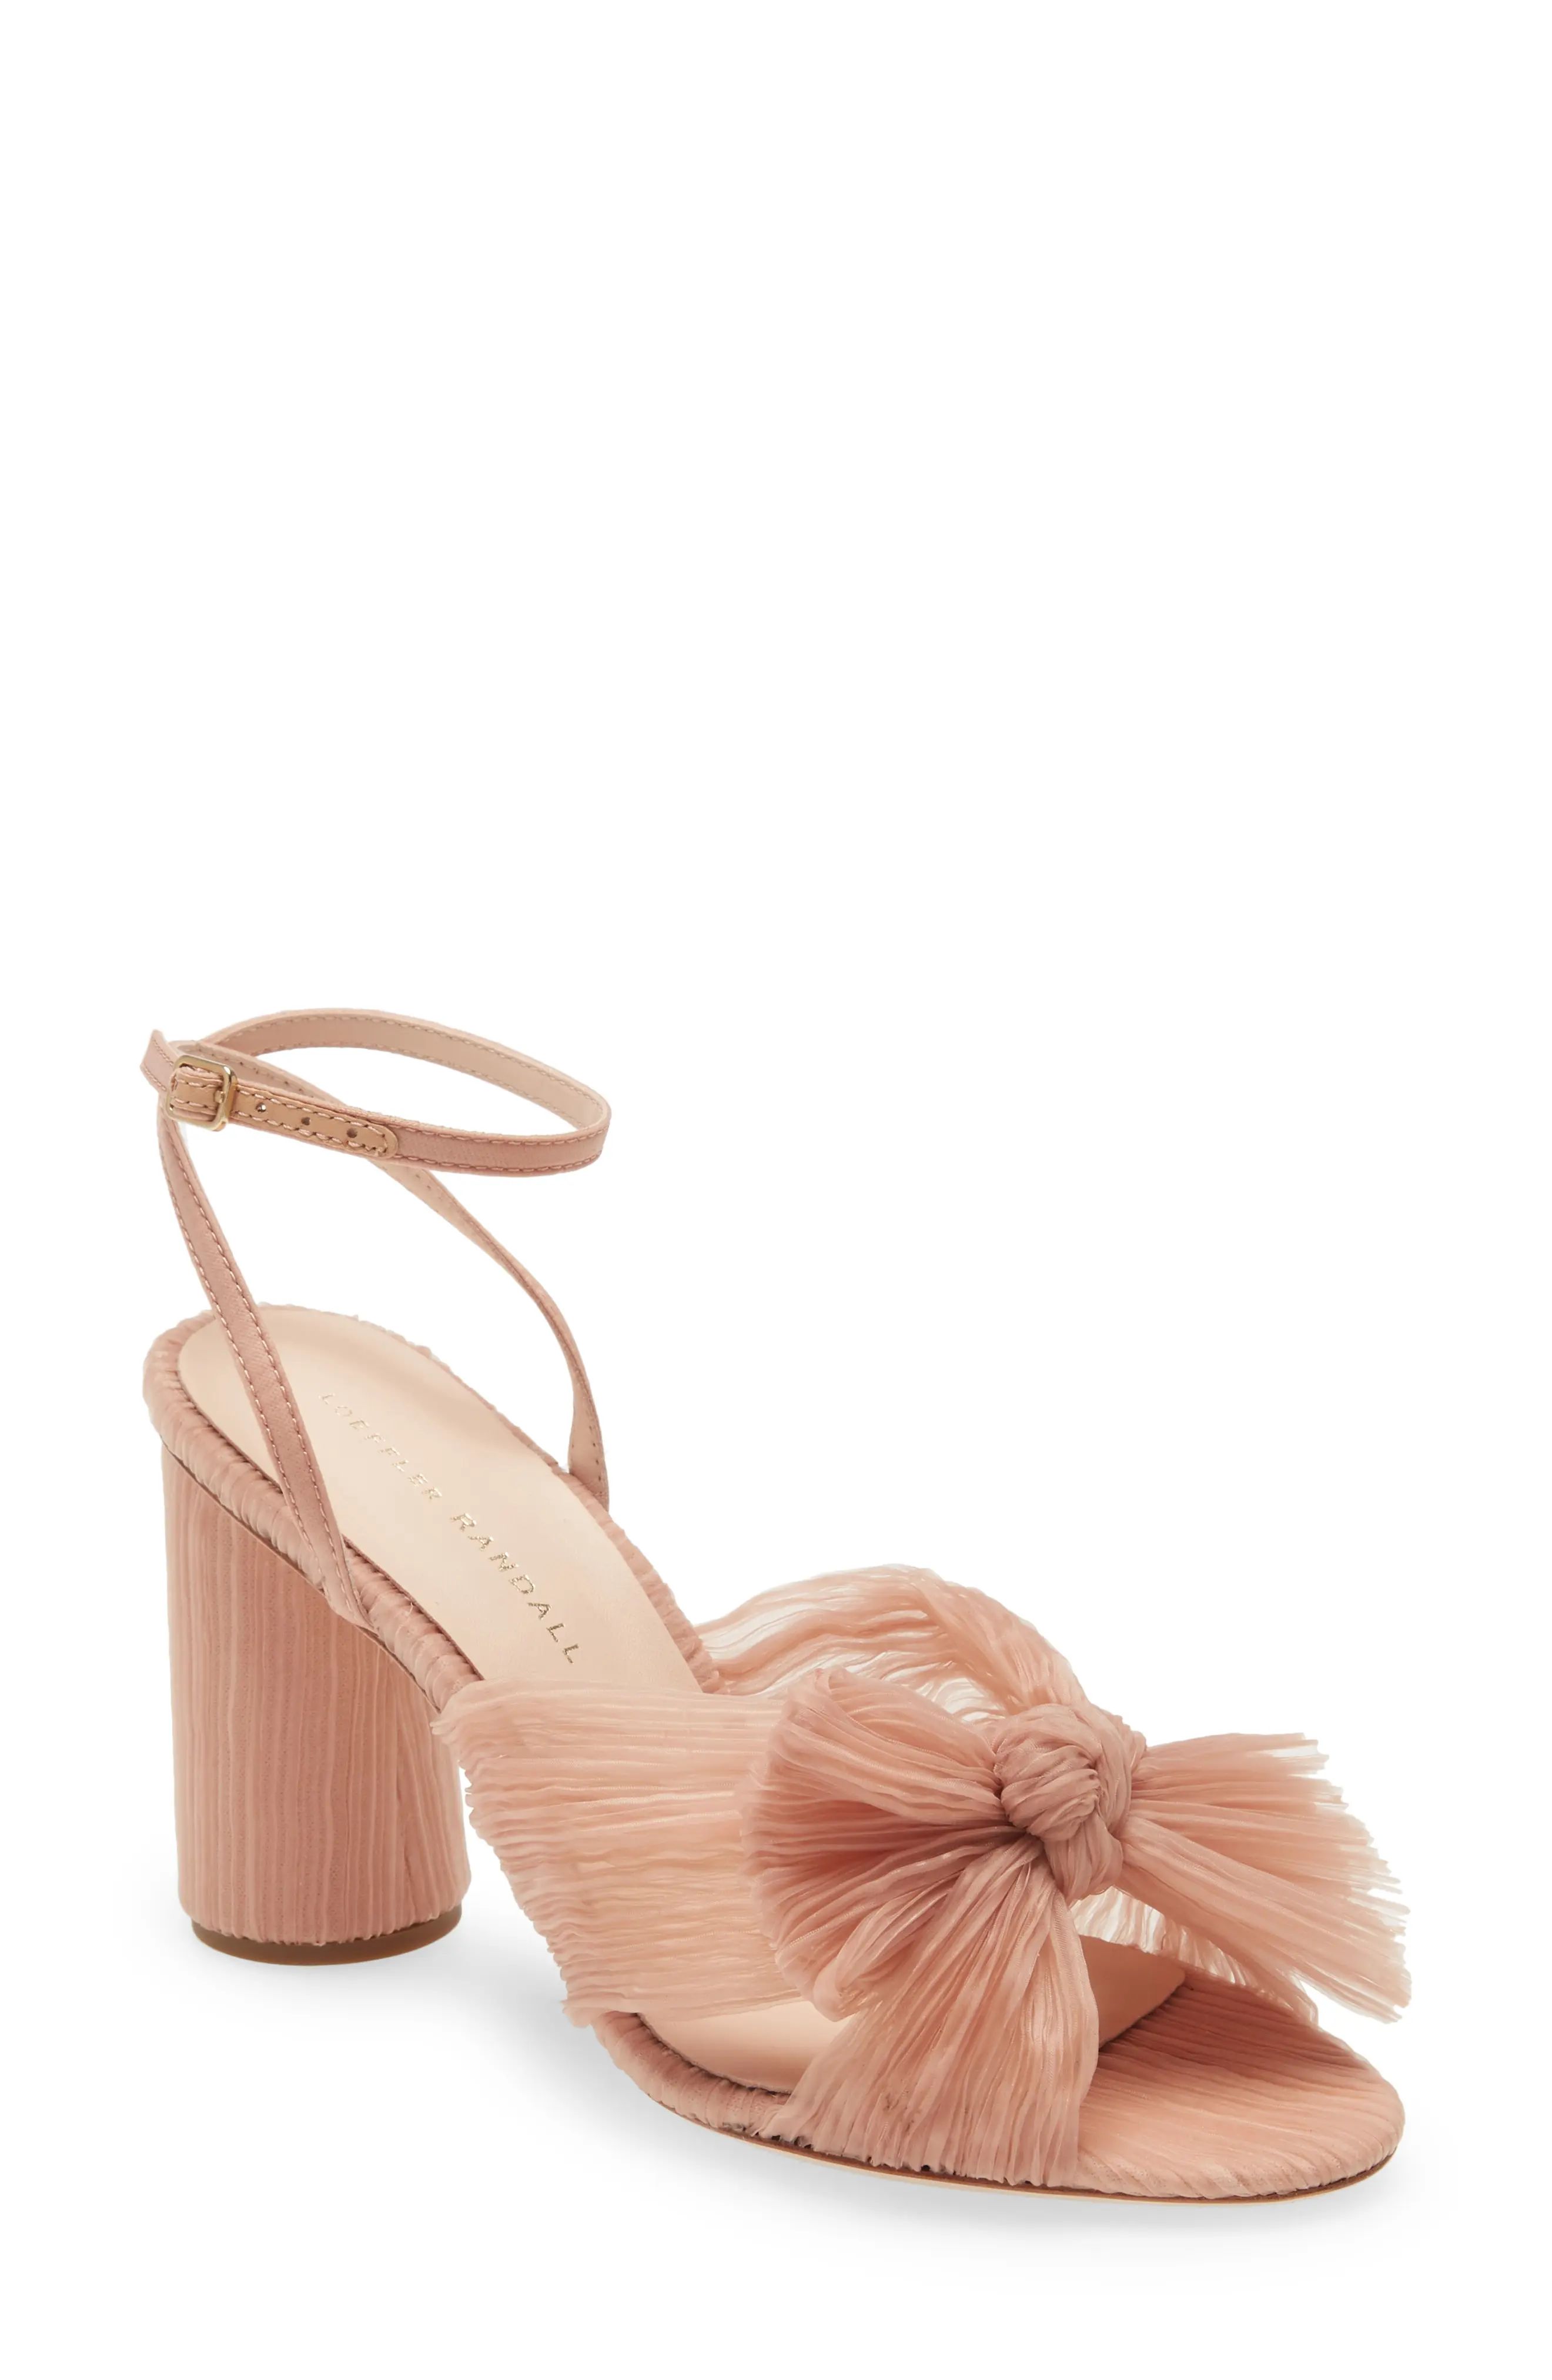 Loeffler Randall Camellia Knotted Sandal in Beauty at Nordstrom, Size 5 | Nordstrom